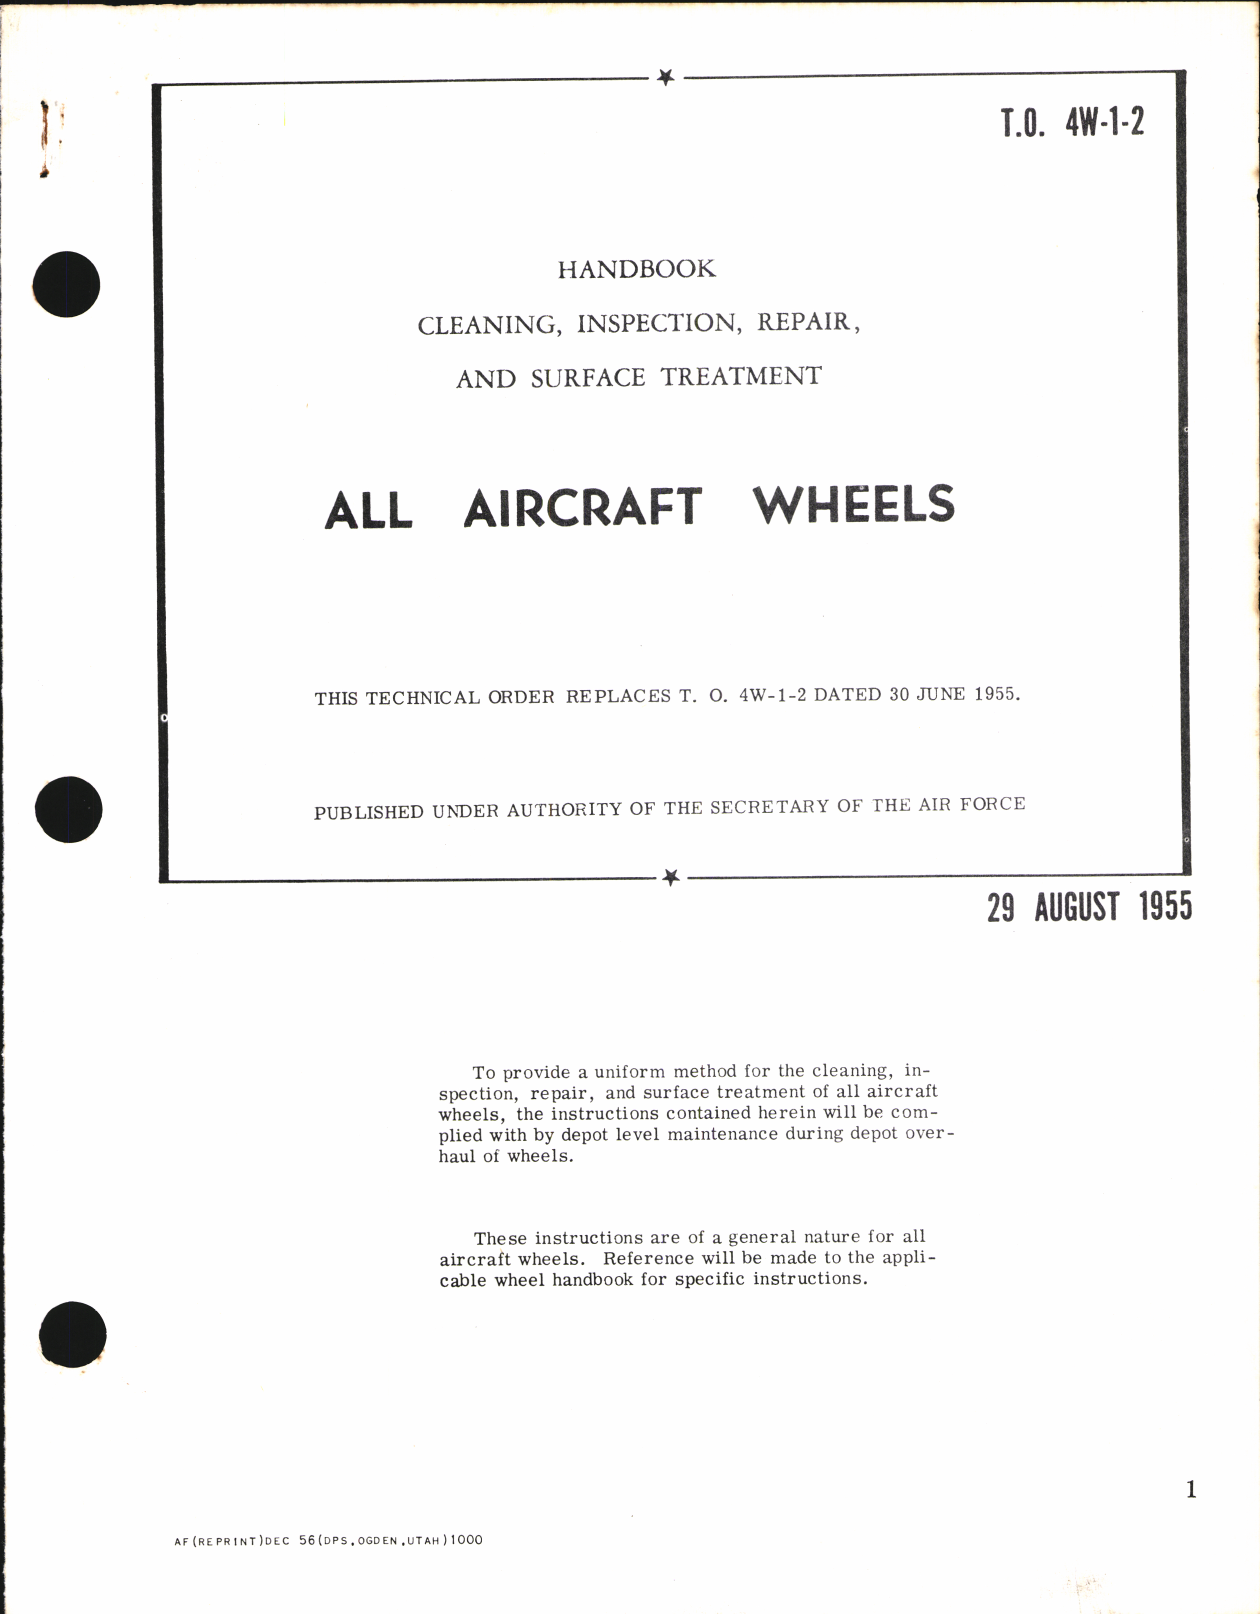 Sample page 1 from AirCorps Library document: Cleaning, Inspection, Repair, and Surface Treatment for All Aircraft Wheels